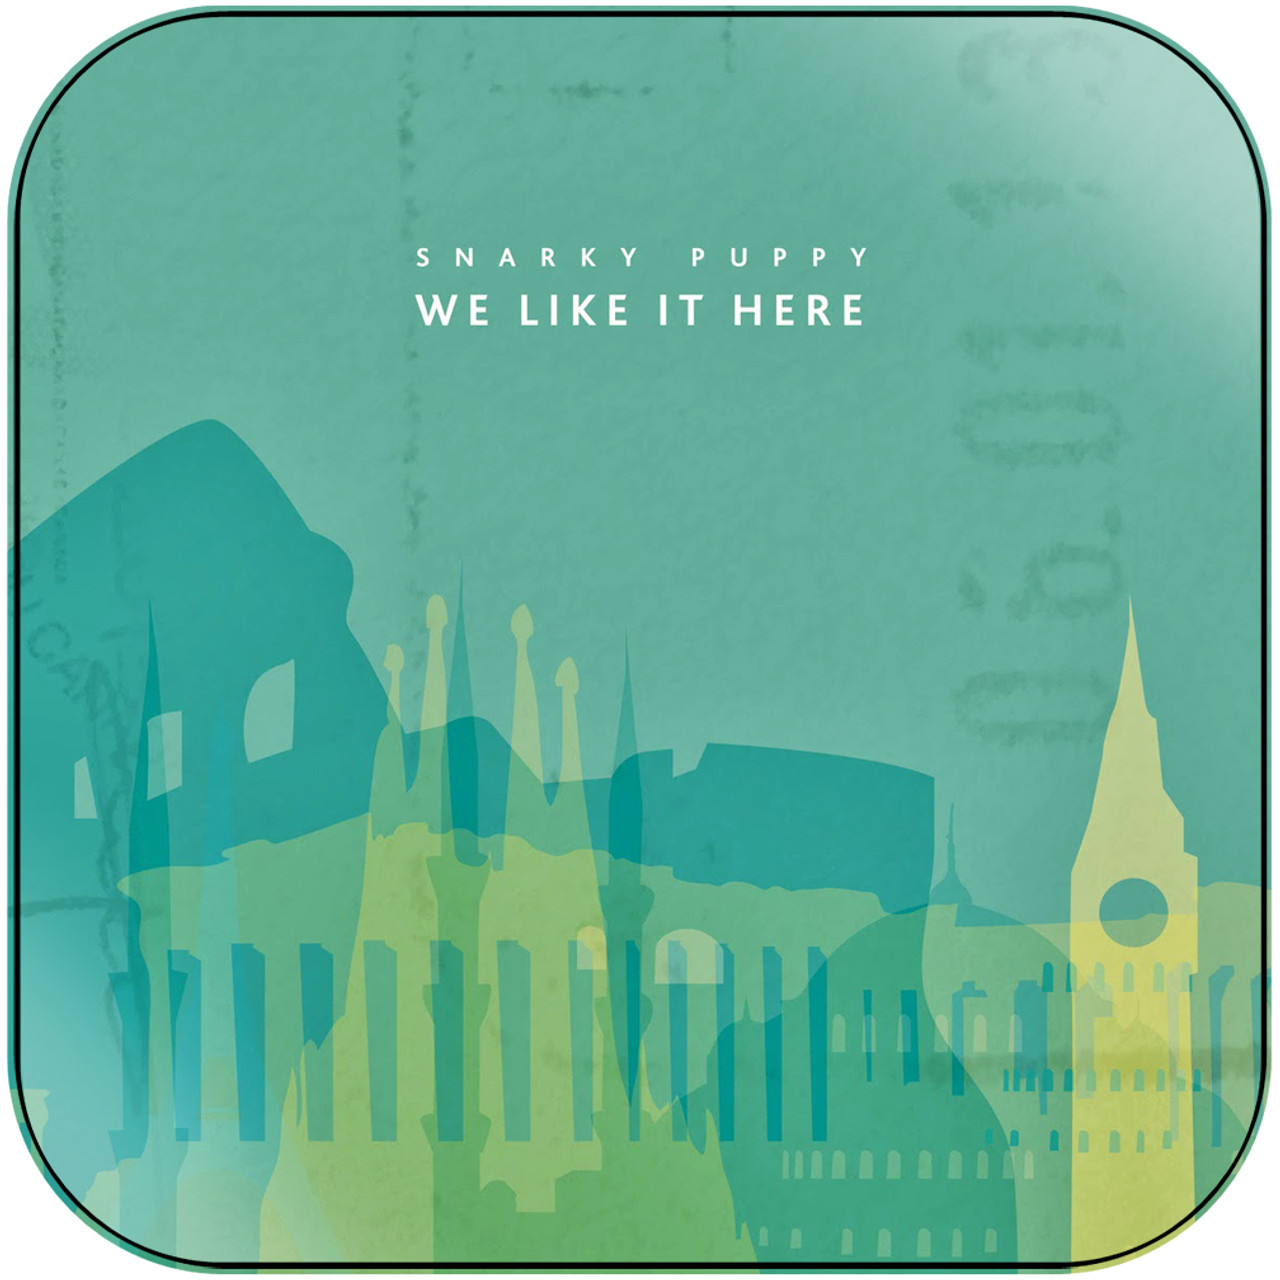 Snarky Puppy We Like It Here Album Cover Sticker